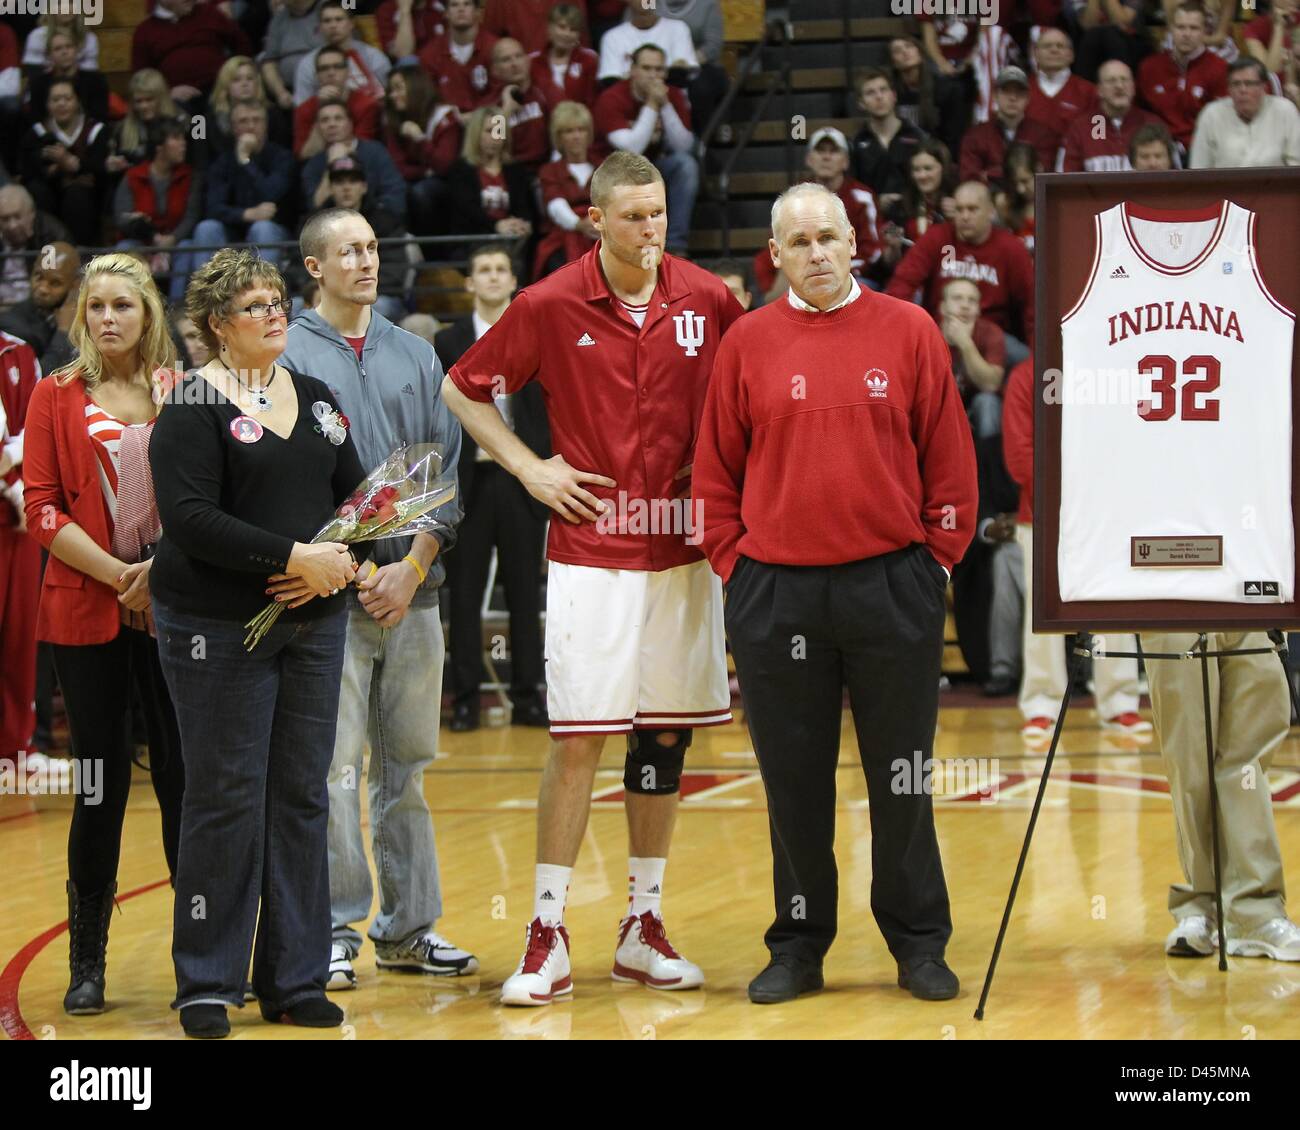 March 6, 2013 - Bloomington, Indiana, USA - March 05, 2013: Indiana Hoosiers forward Derek Elston (32) stands with his family during senior night during an NCAA basketball game between Ohio State University and Indiana University at Assembly Hall in Bloomington, Indiana. Ohio State upset #2 Indiana 67-58. Stock Photo